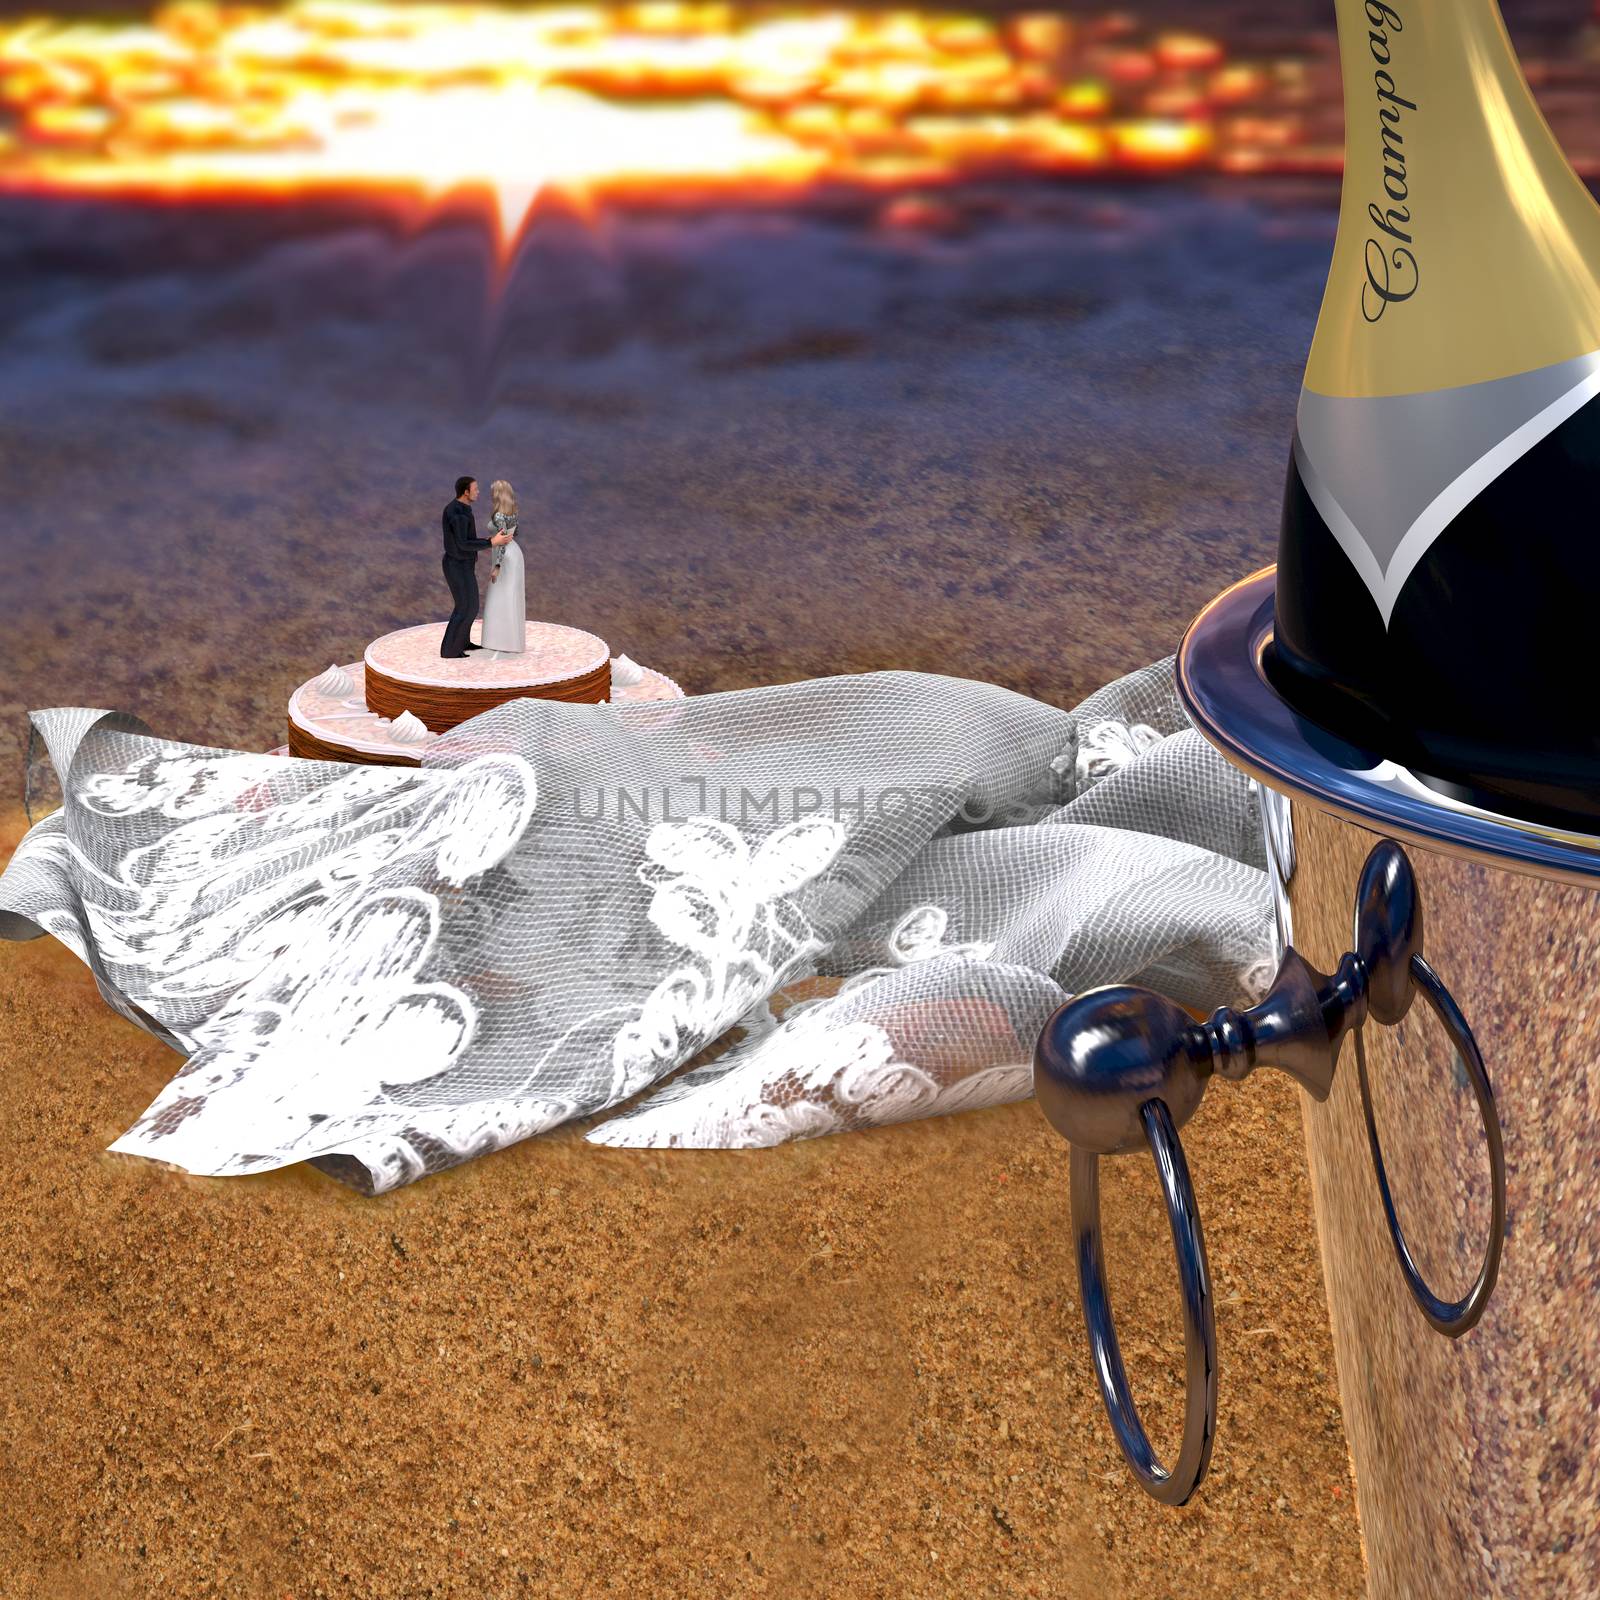 This illustration suggests a just married couple on the beach. Champagne, wedding veil, cake and top cake figurines.